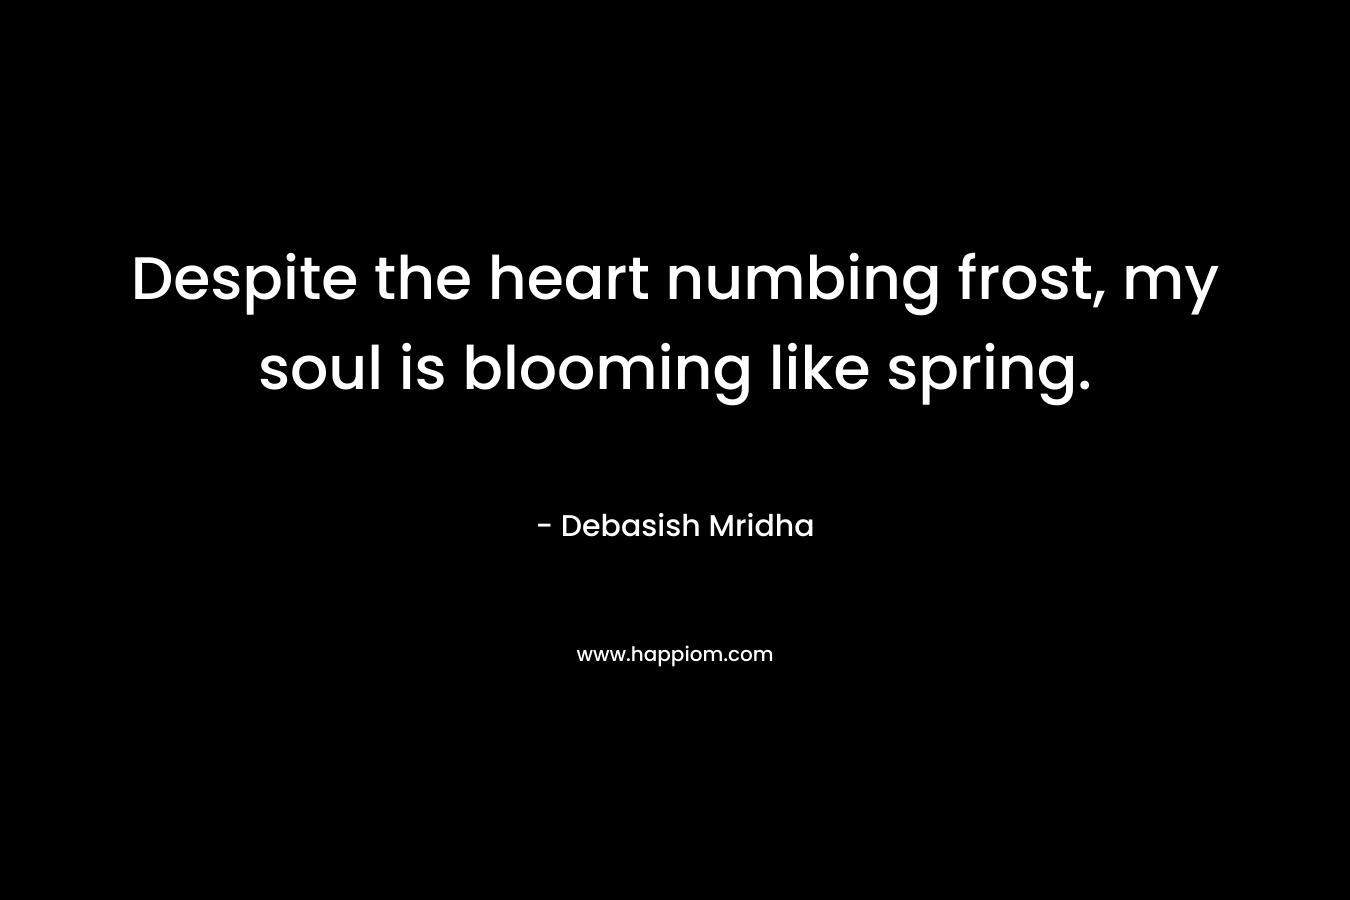 Despite the heart numbing frost, my soul is blooming like spring.